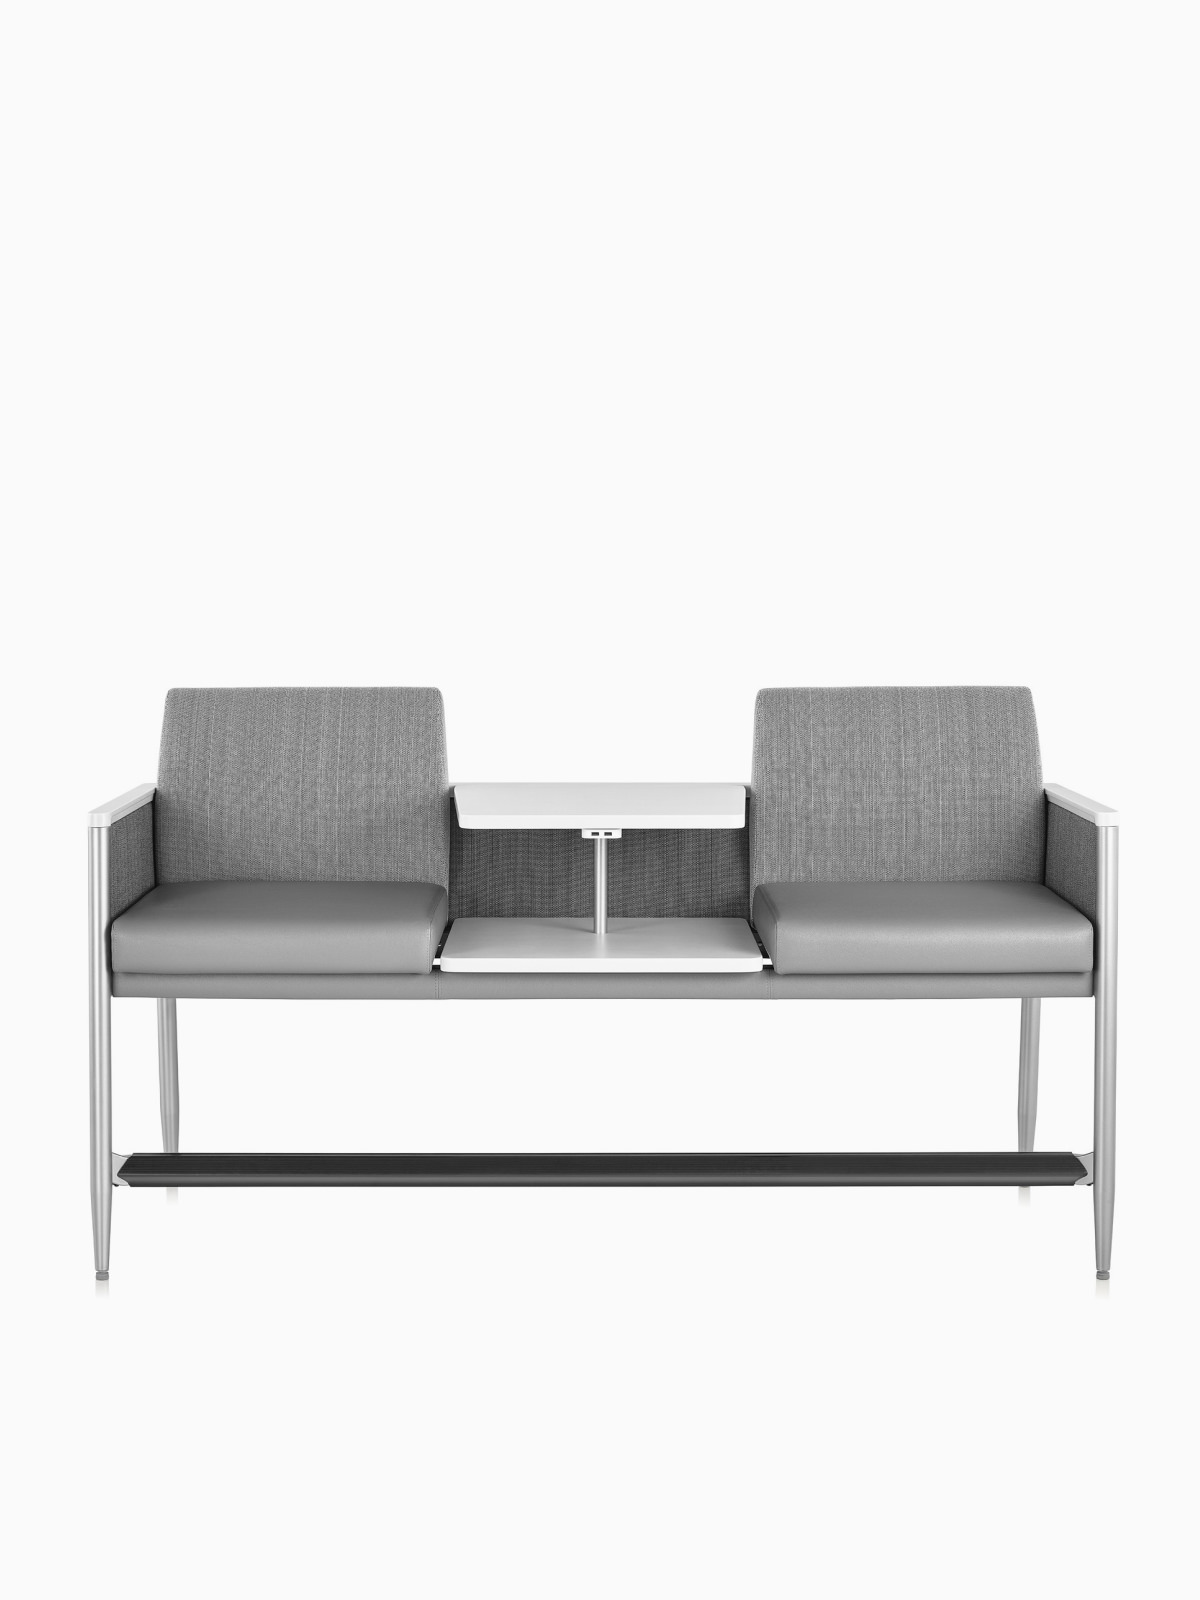 Nemschoff Palisade Easy Access Multiple Seating